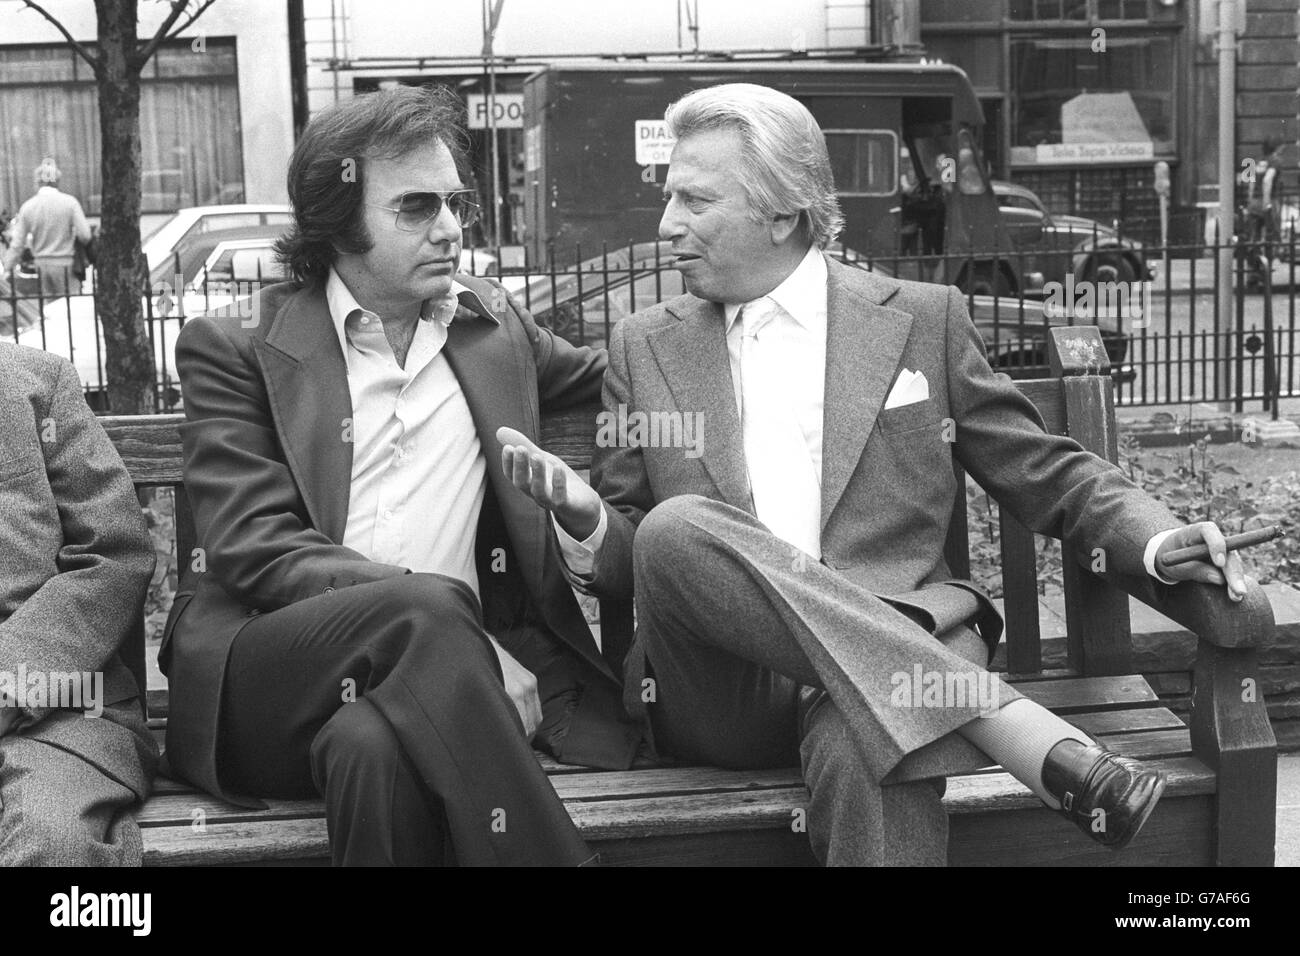 Sharing a London park bench are American singer-songwriter Neil Diamond (l) and Lord Delfont, who has clinched a deal for Diamond to star in his first feature film, The Jazz Singer, which is to be made by EMI of which Lord Delfont is chief executive. The Jazz Singer is a $10m contemporary version of the Al Jolson original. Stock Photo